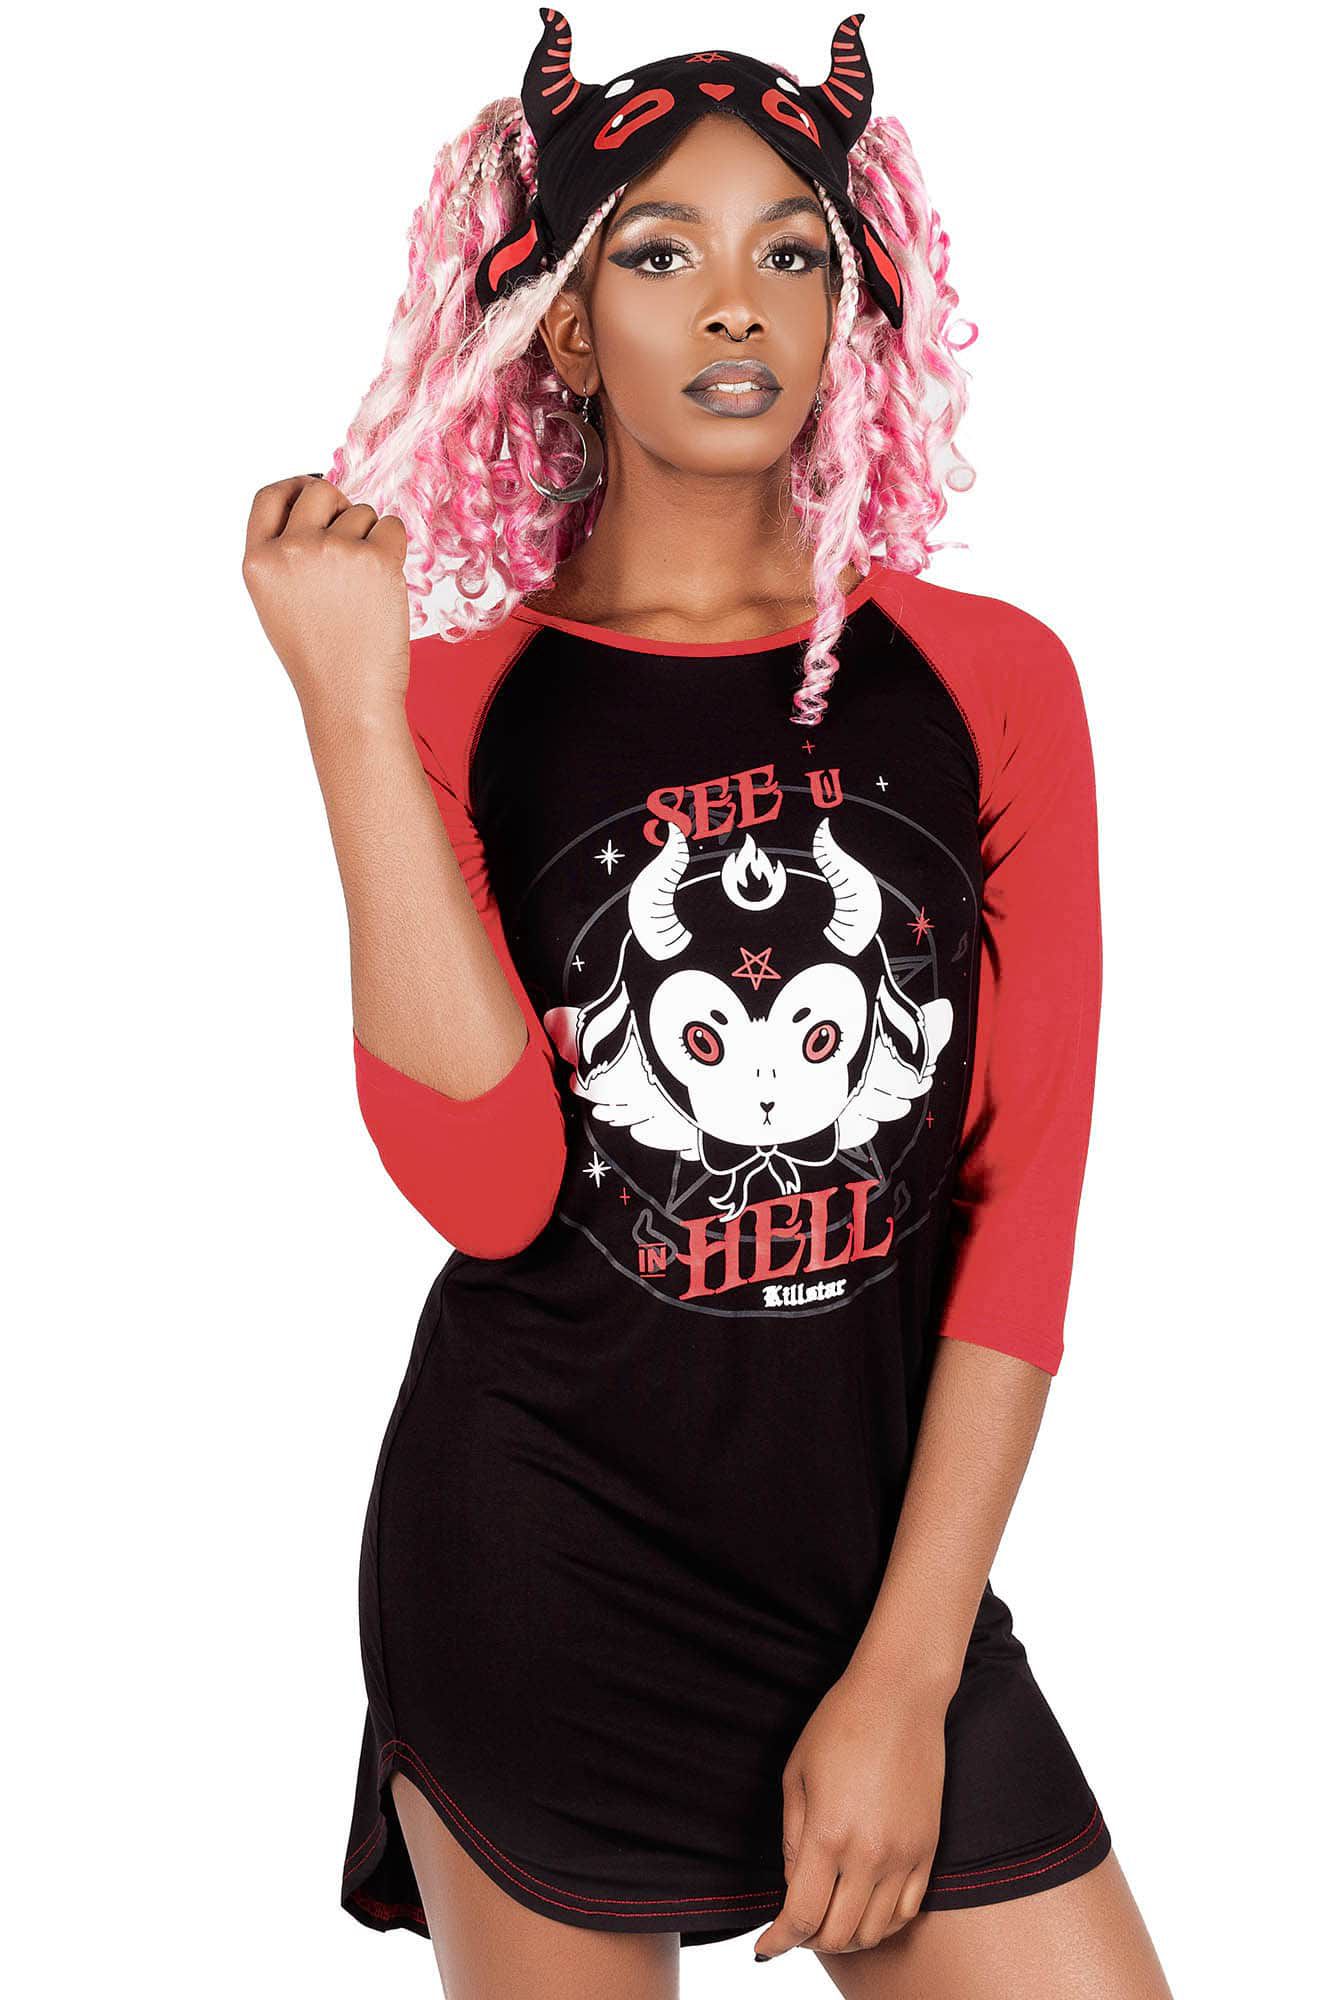 KS03170bb_tee-shirt-nuisette-gothique-rock-see-u-in-hell